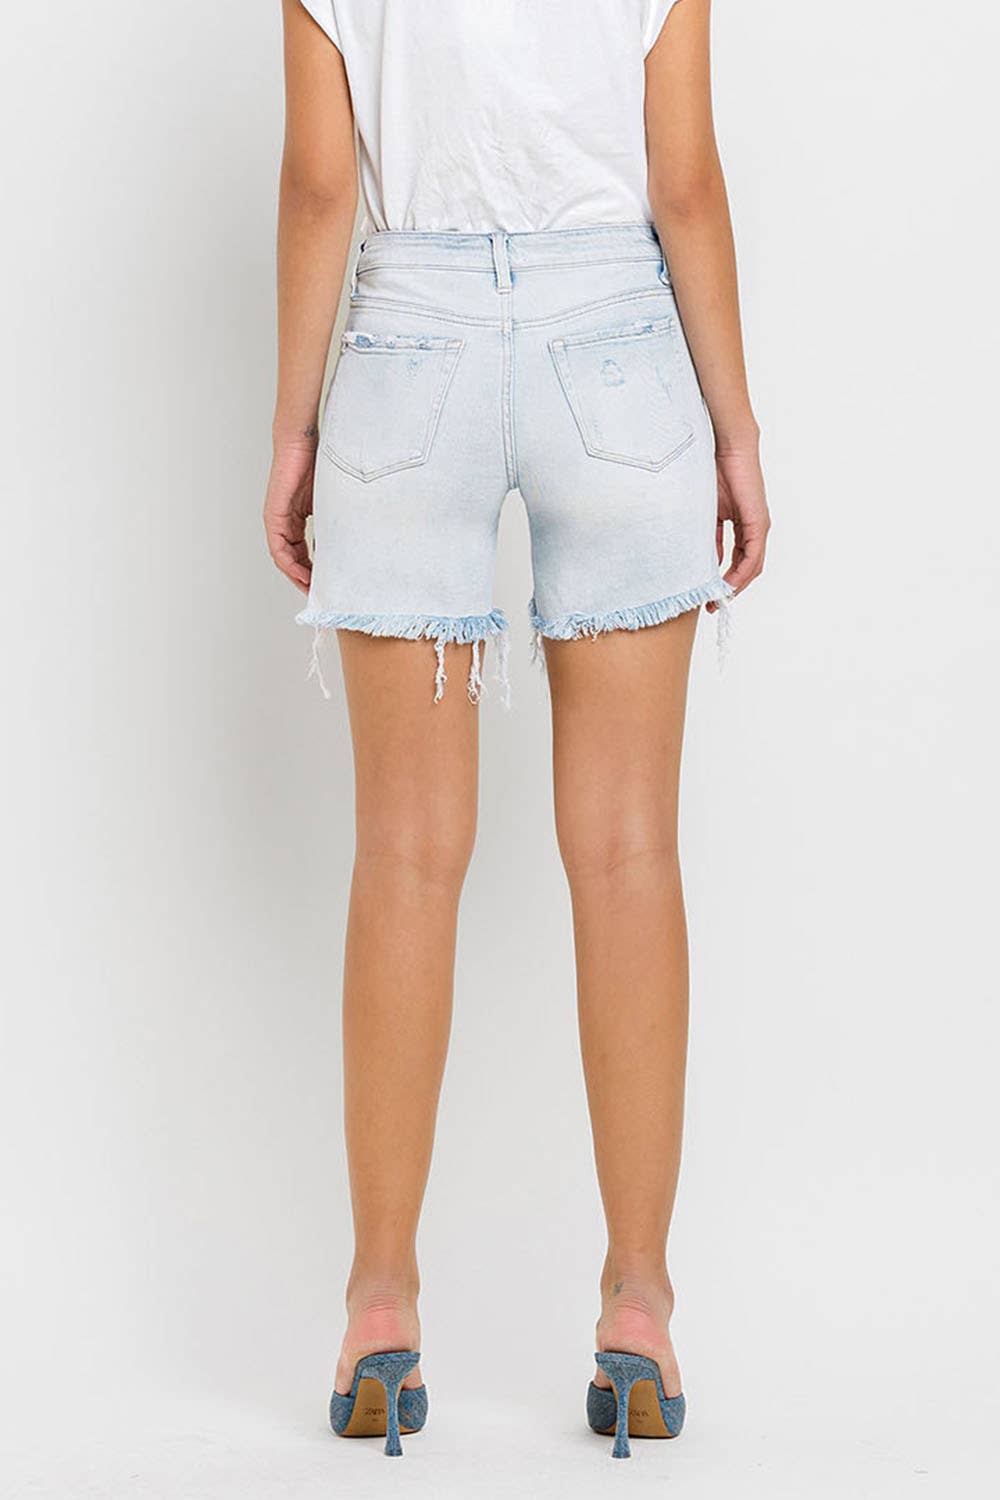 VERVET by FLYING MONKEY - MID RISE DISTRESSED STRETCH SHORTS